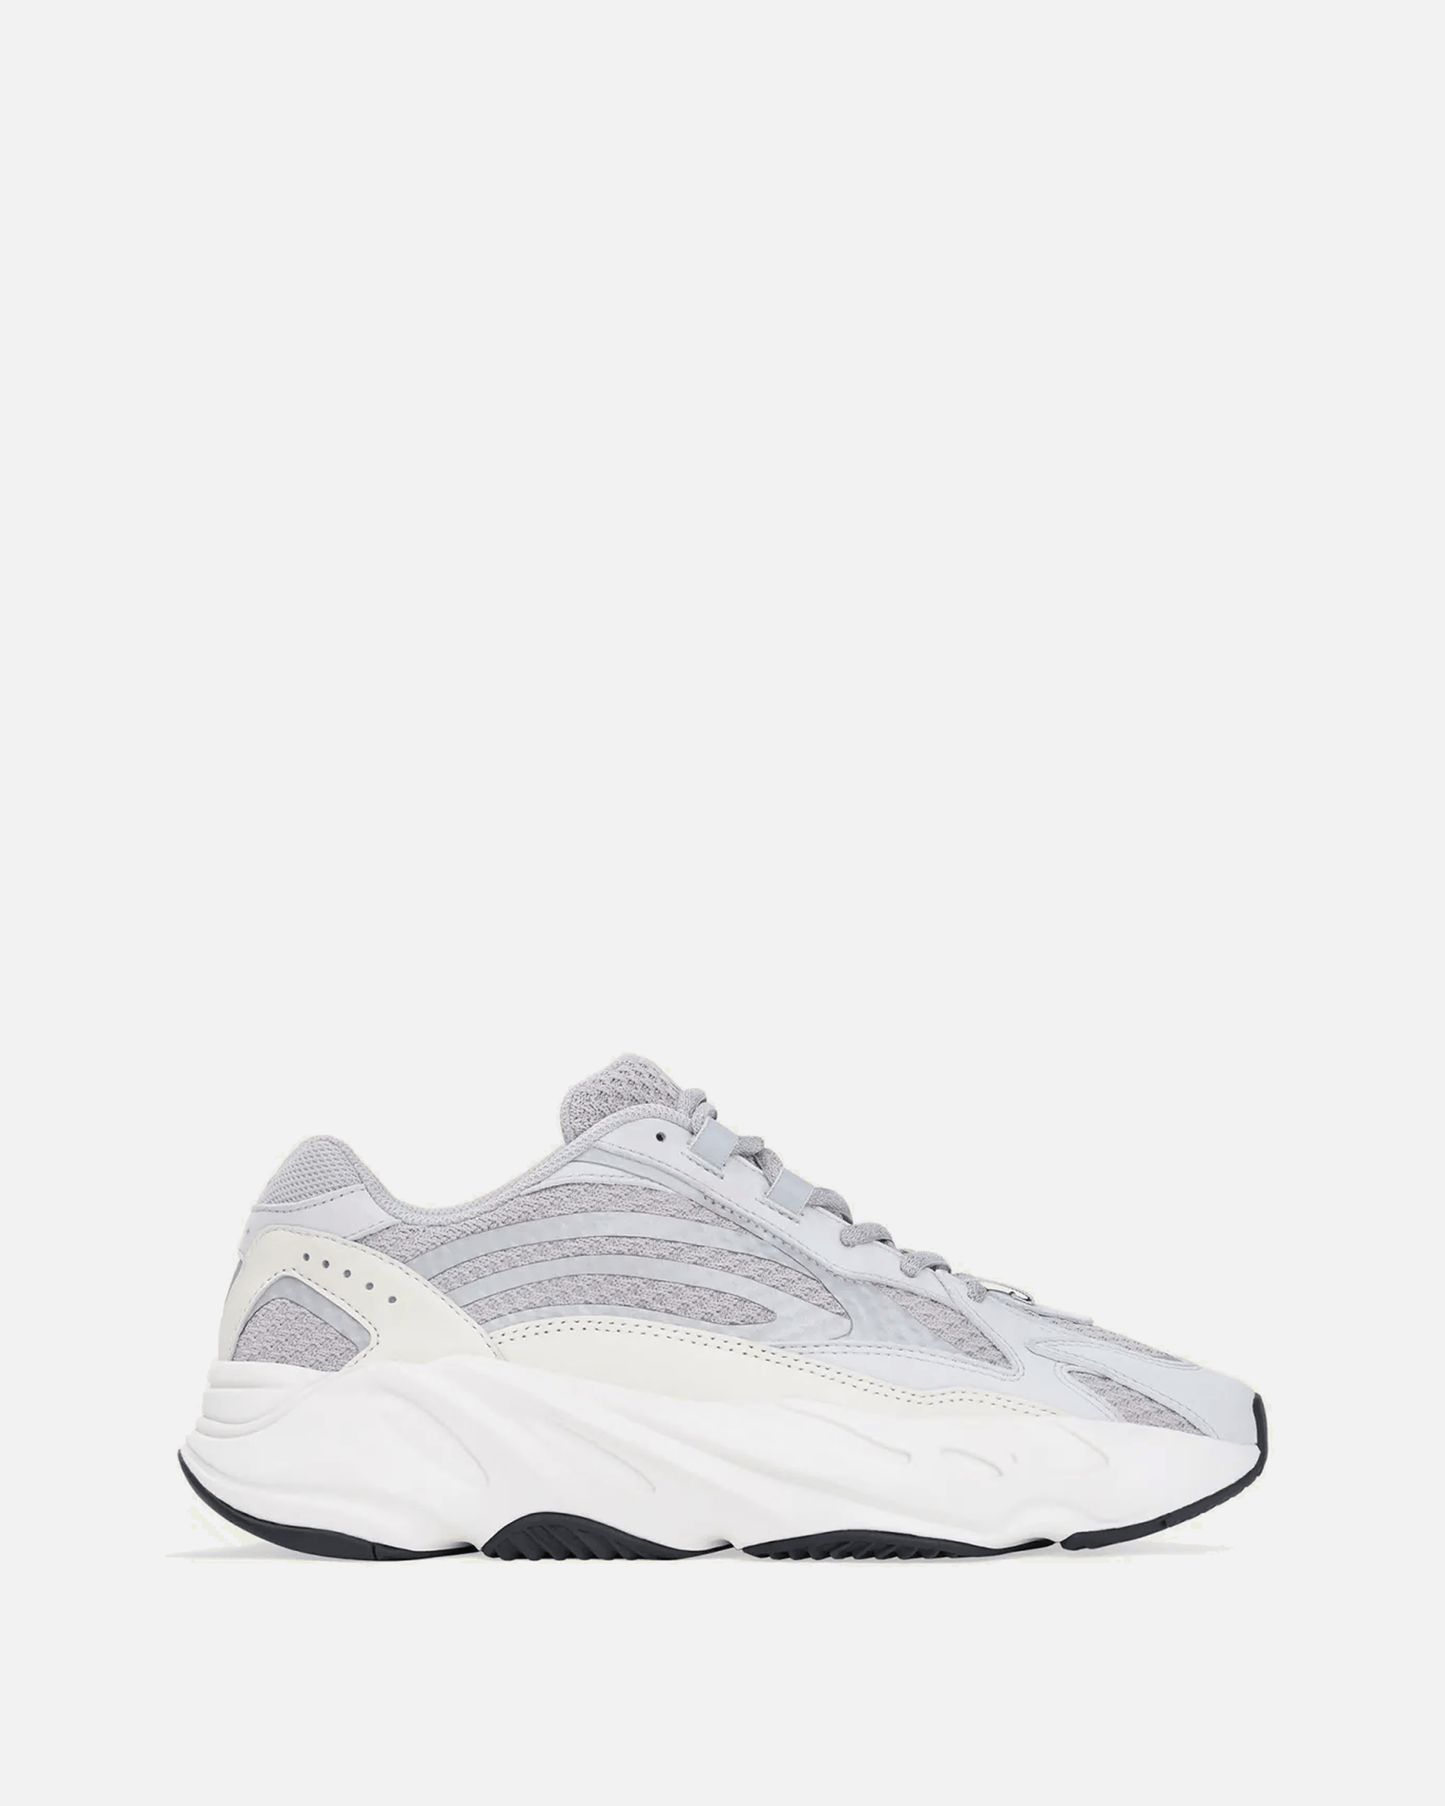 Adidas Releases Yeezy Boost 700 V2 'Static'